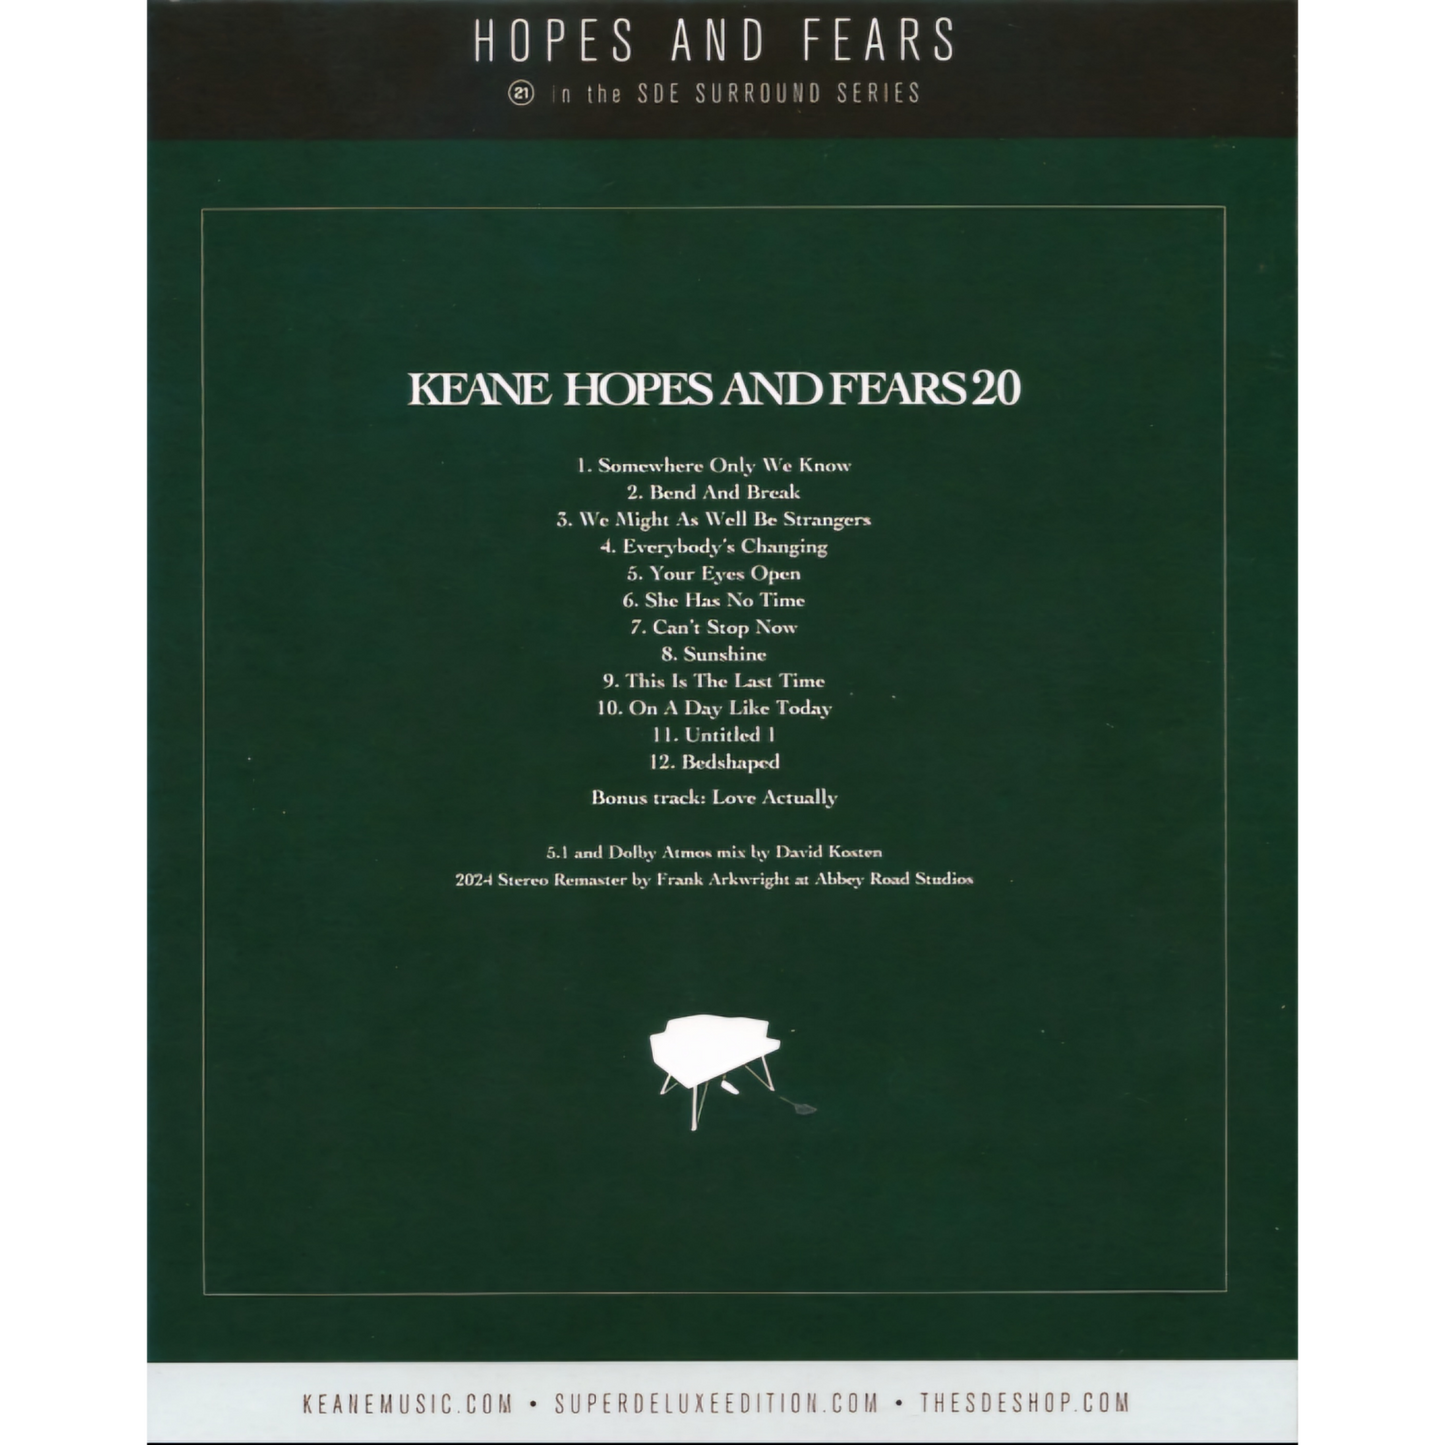 Hopes-and_Fears_20_Keane_Dolby_Atmos_Blu-ray_Audio